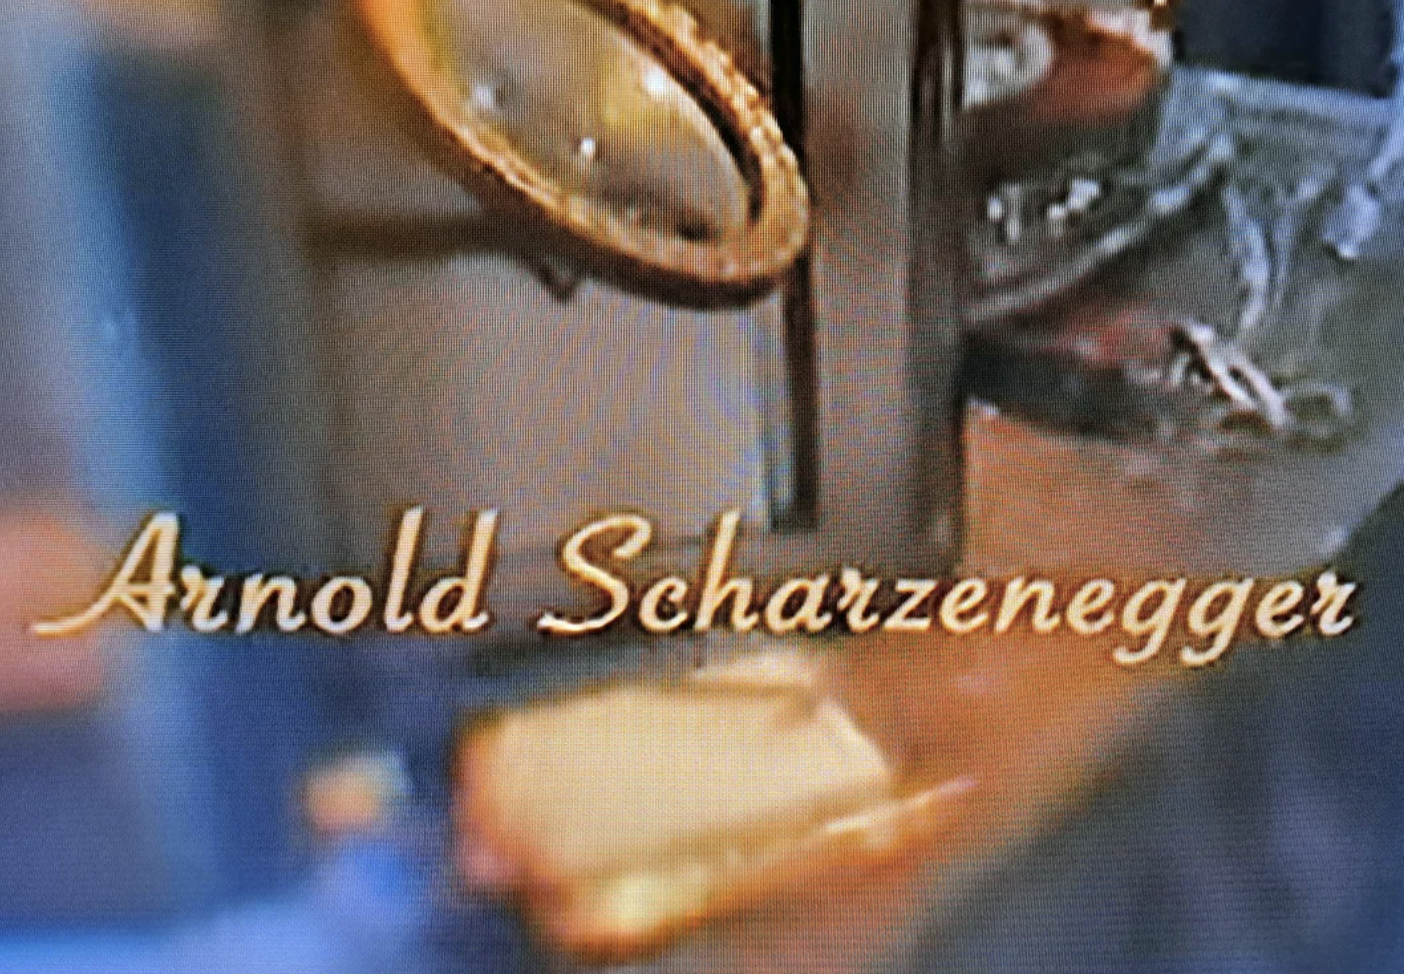 They misspelled 'Schwarzenegger' in Journey to China (Iron Mask).